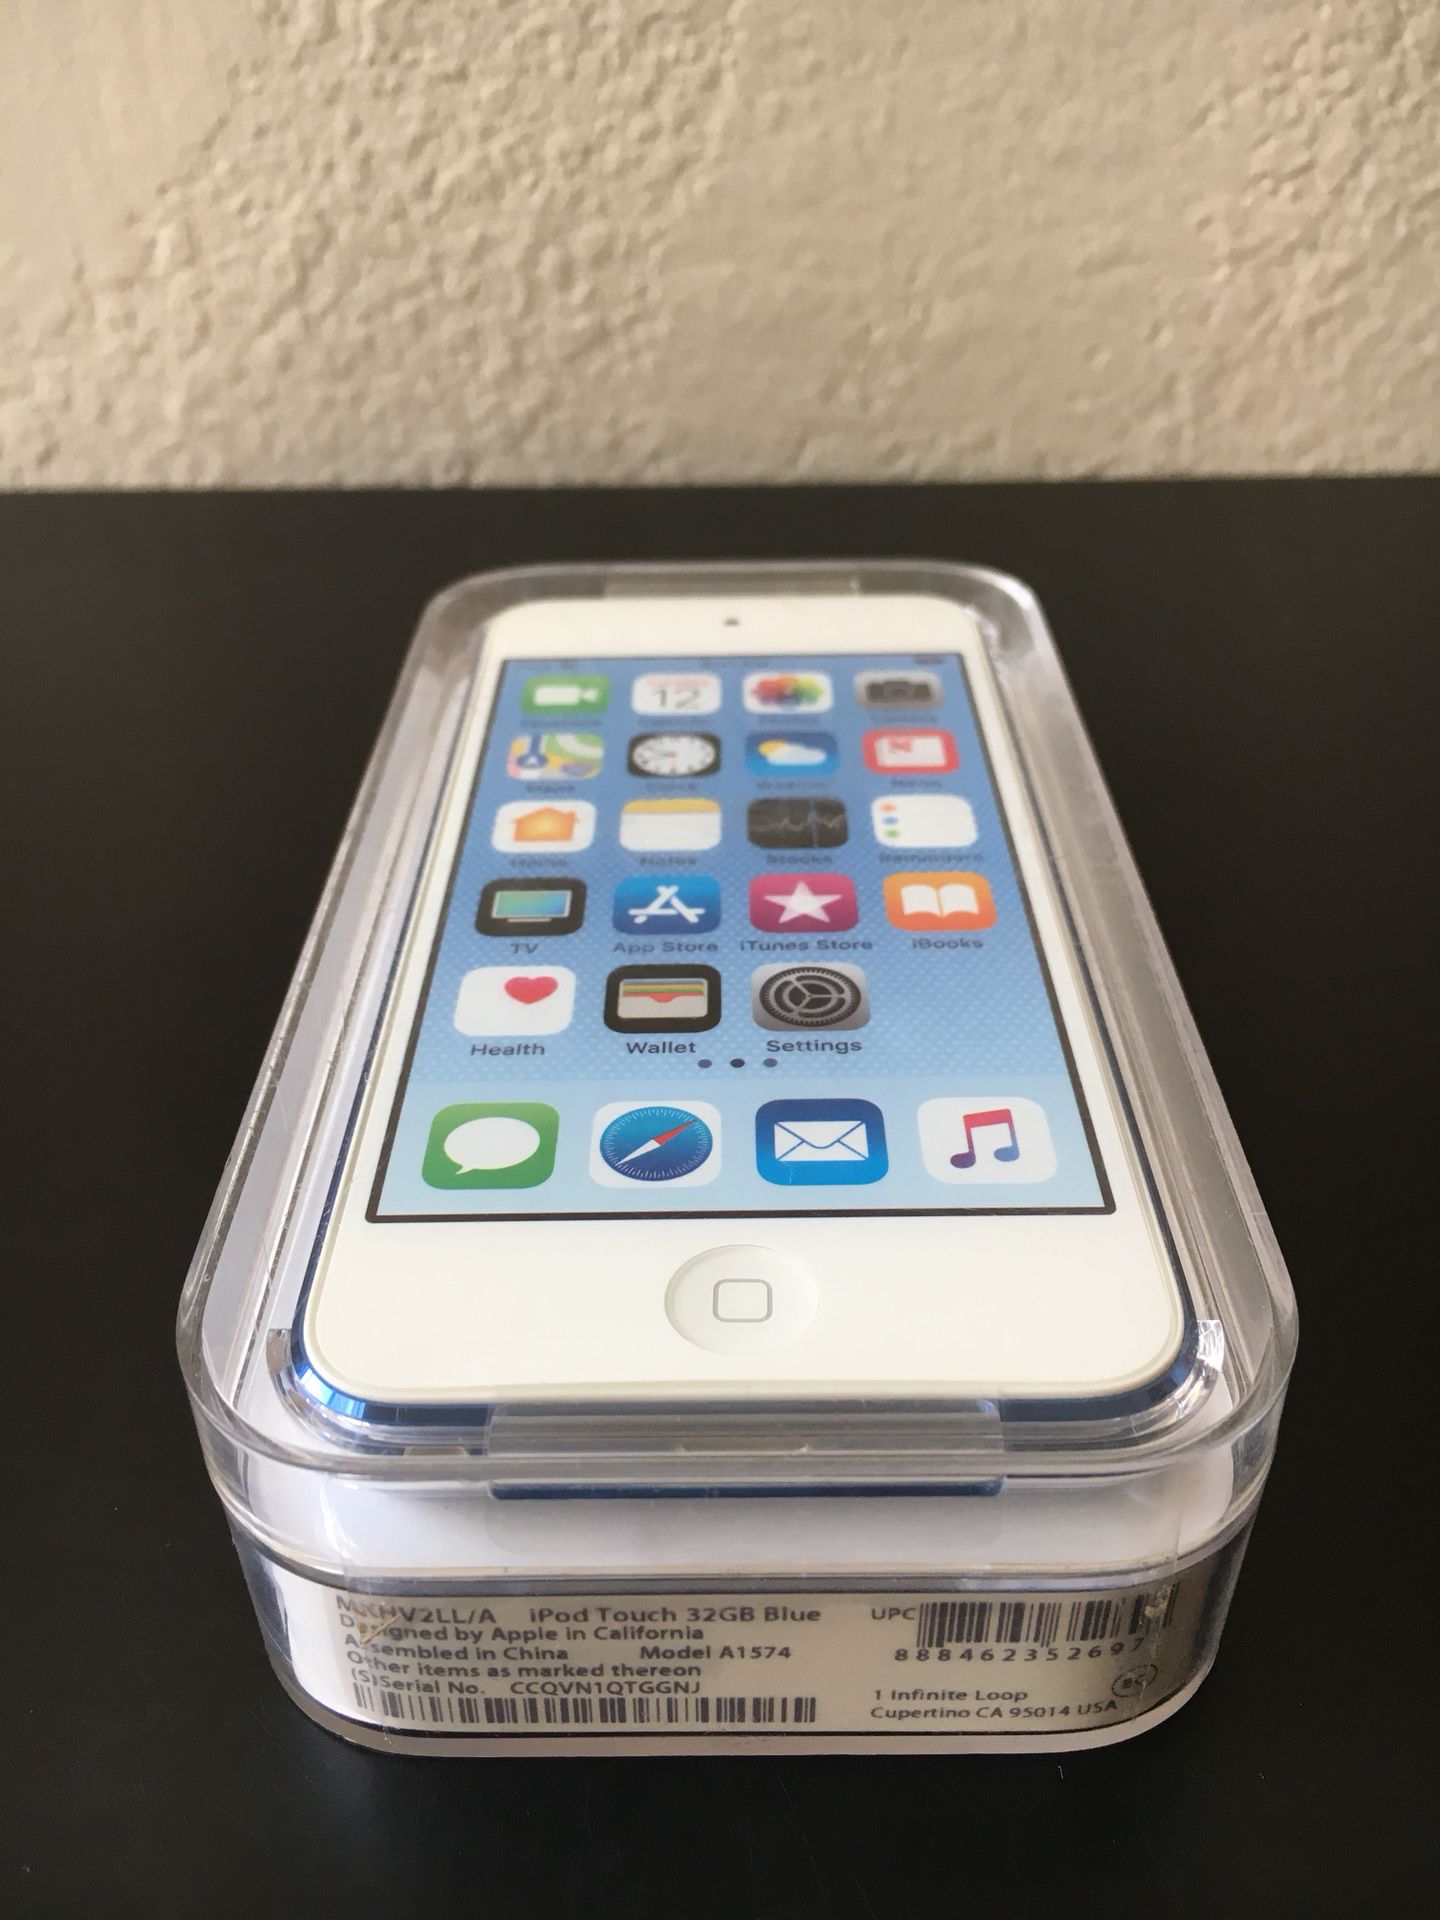 New 32GB iPod Touch 6th Generation Blue